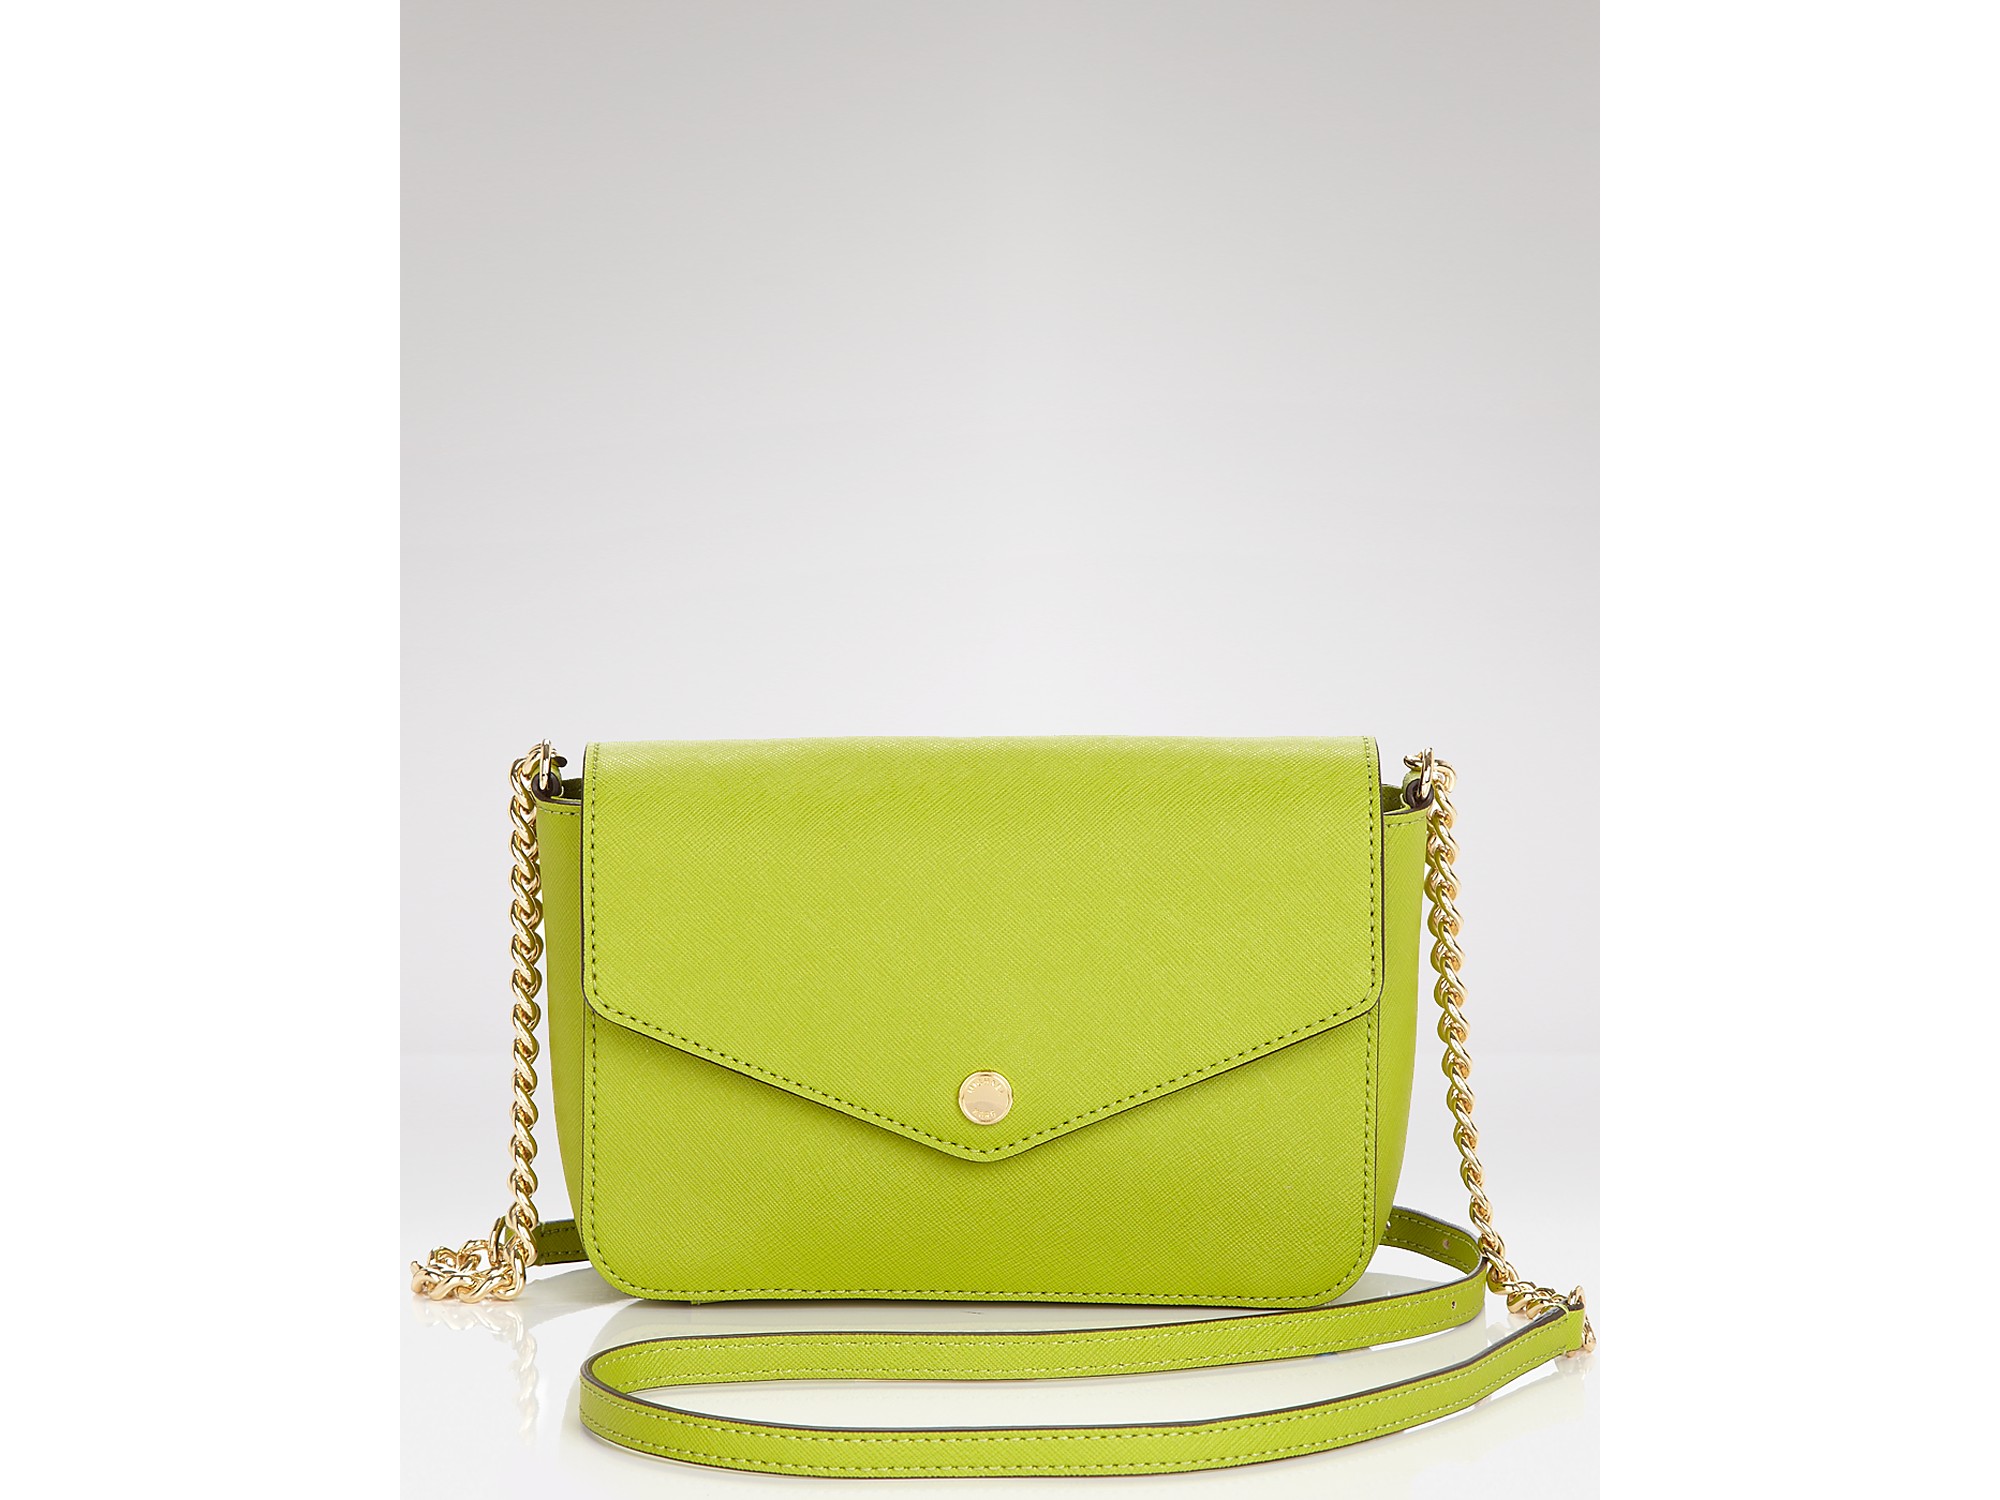 Lyst - Michael Kors Michael Shoulder Bag Small Flap Leather in Green